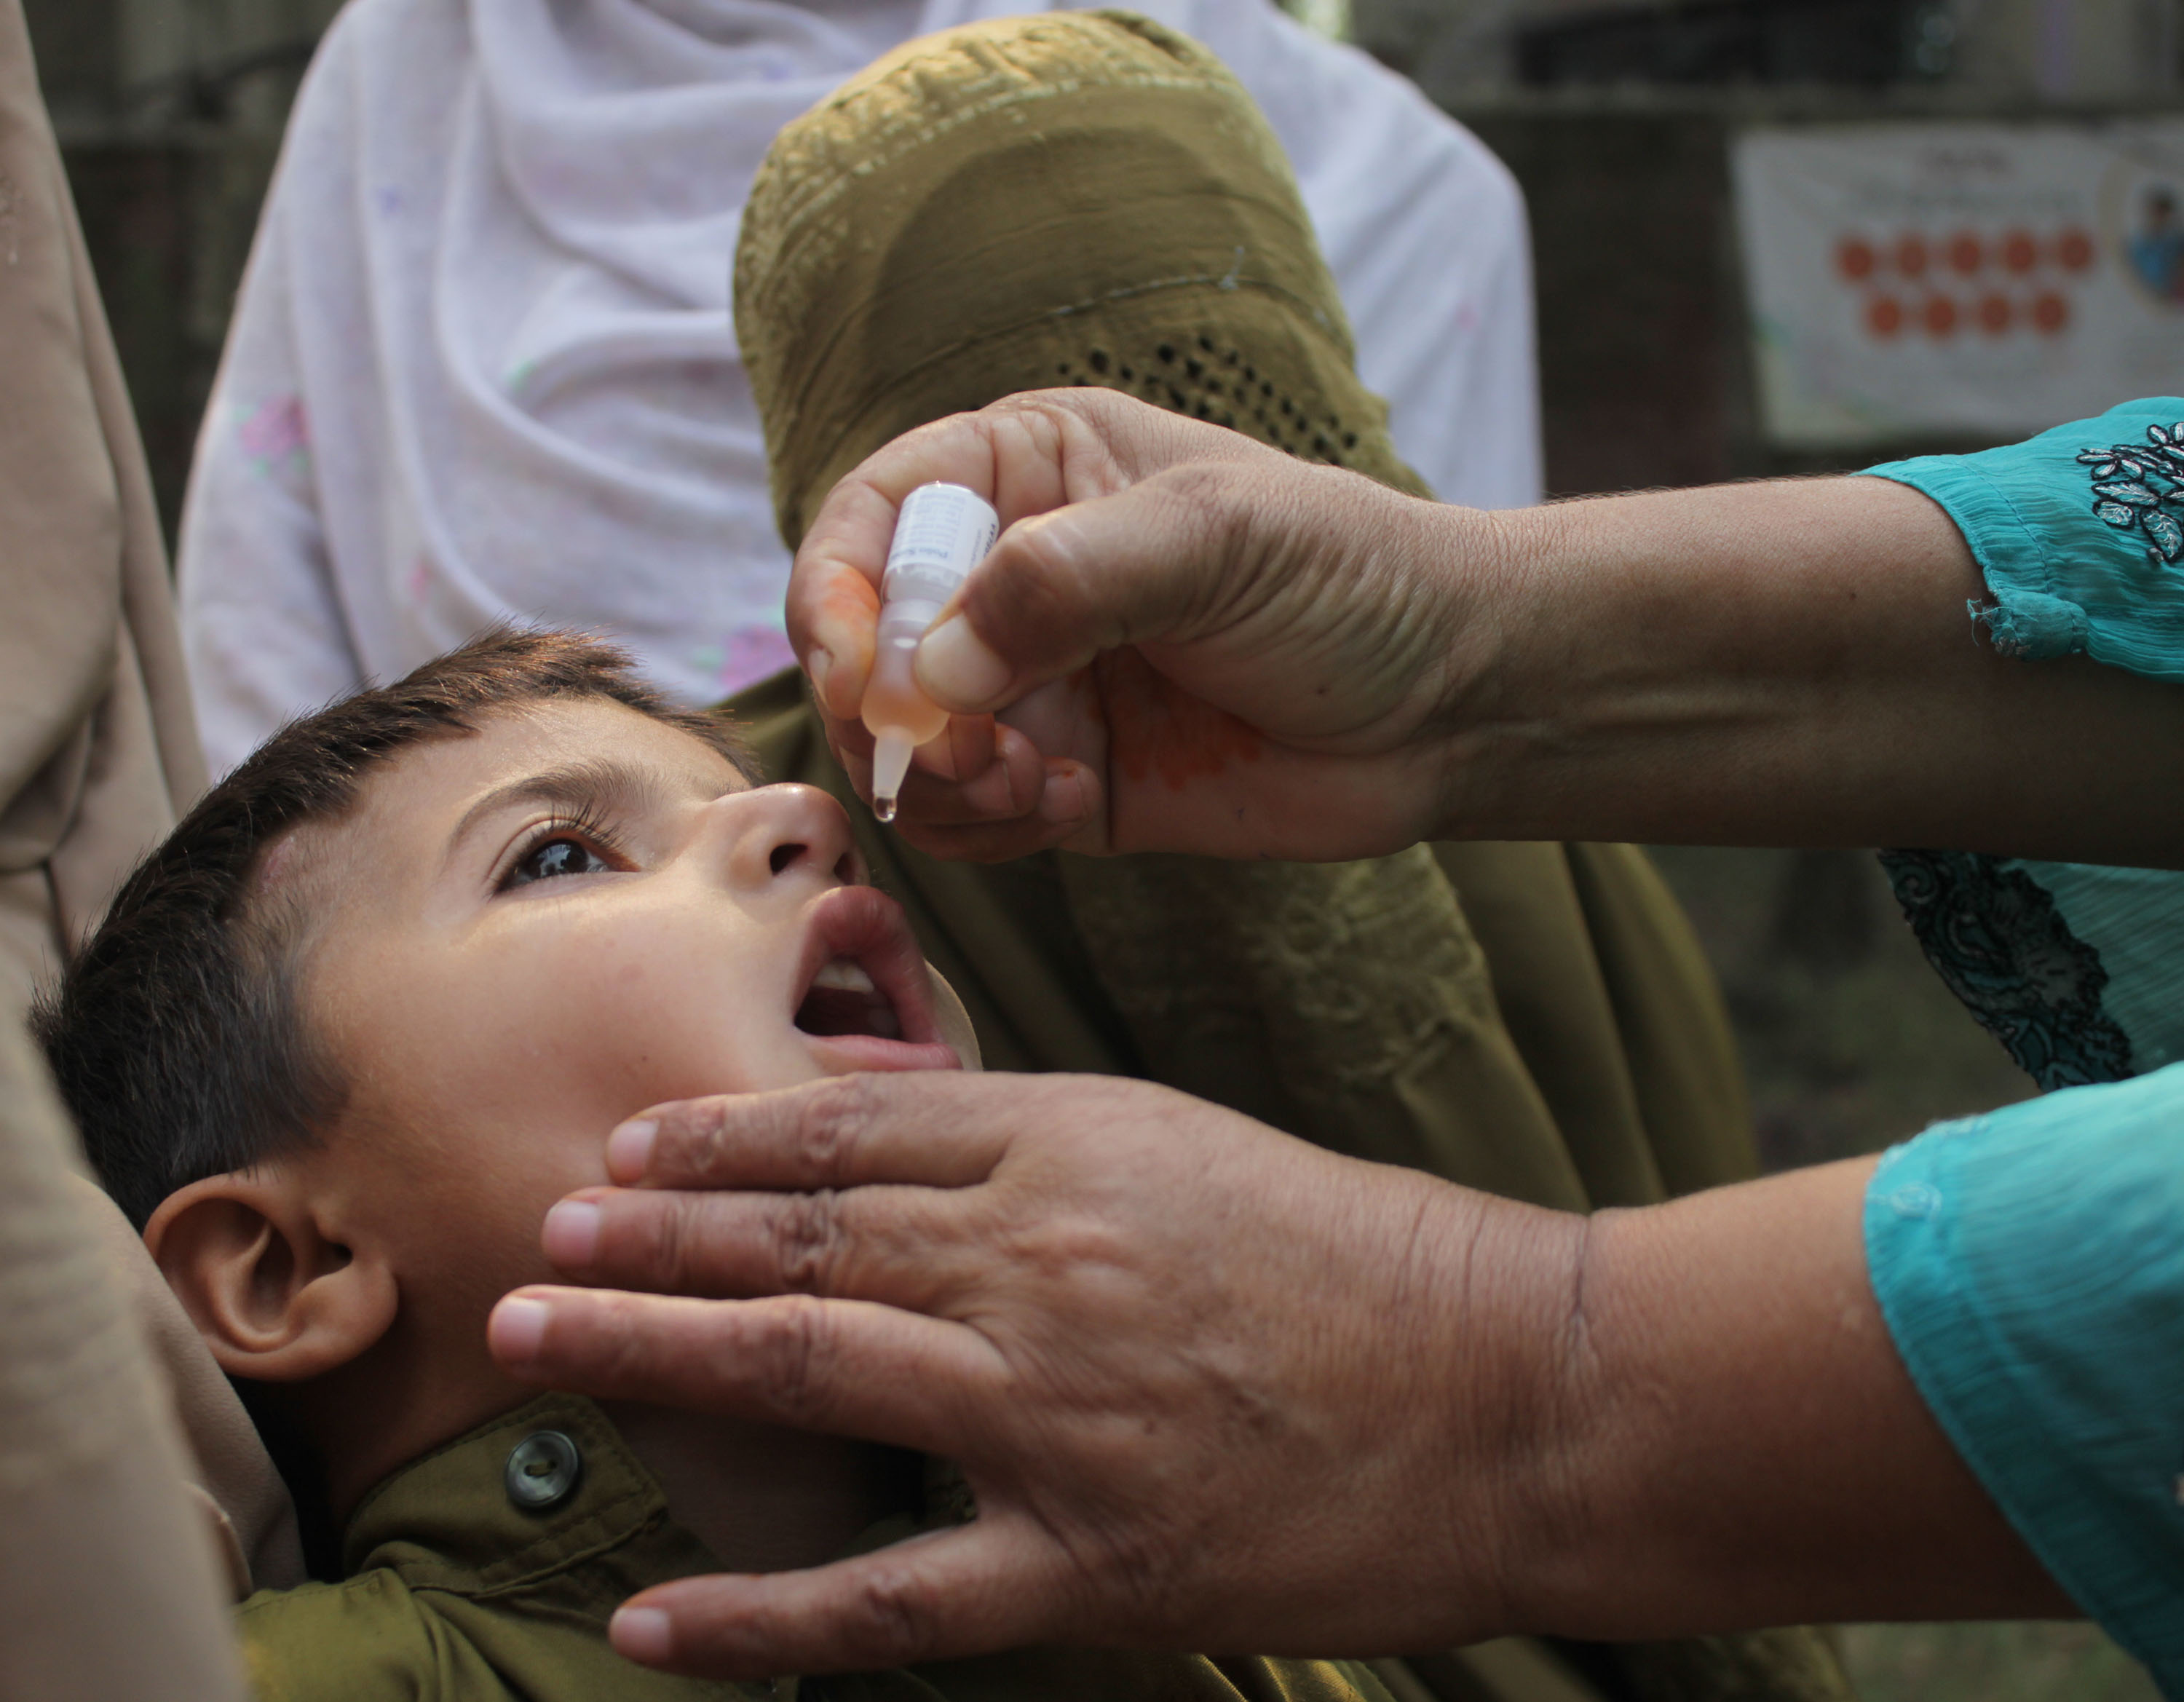 All good now: A child in Lahore, Pakistan receives the polio vaccine in 2014